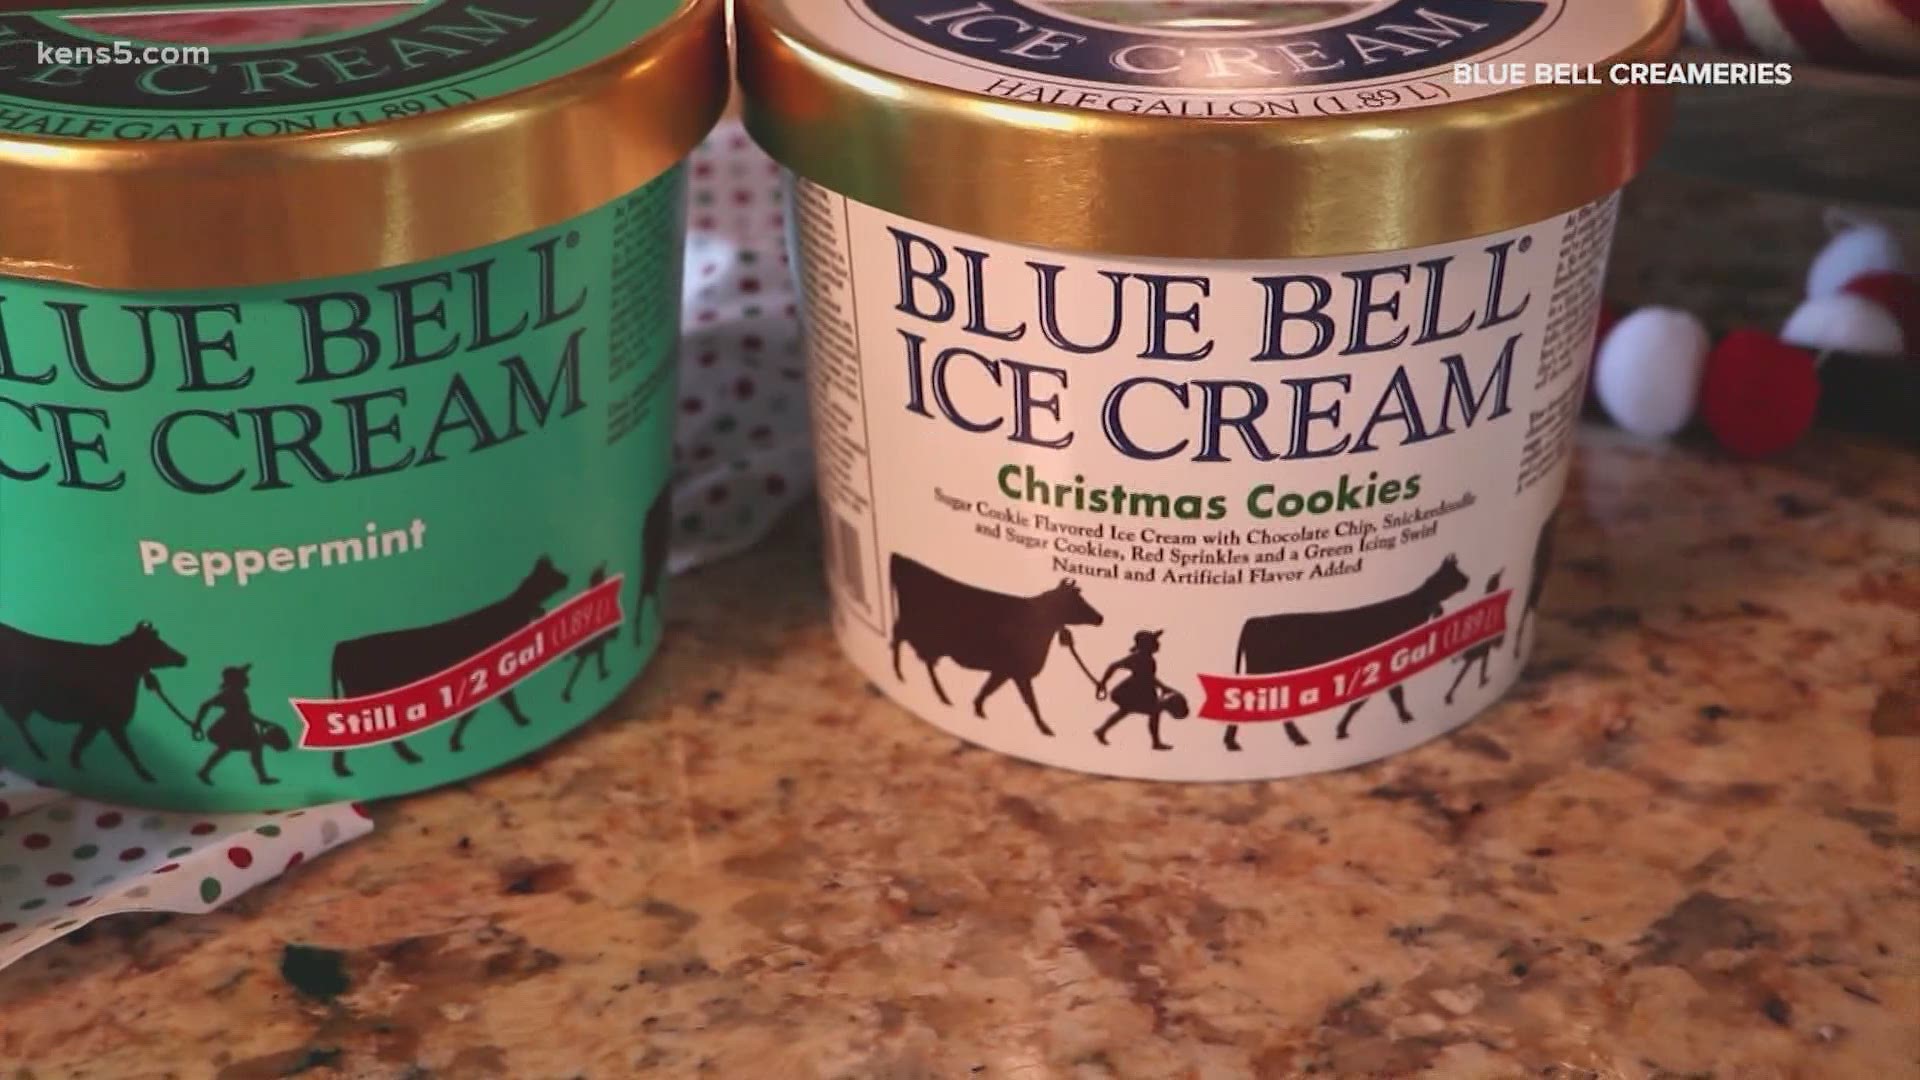 Blue Bell is scooping out their holiday flavors, including peppermint and Christmas cookies ice cream.